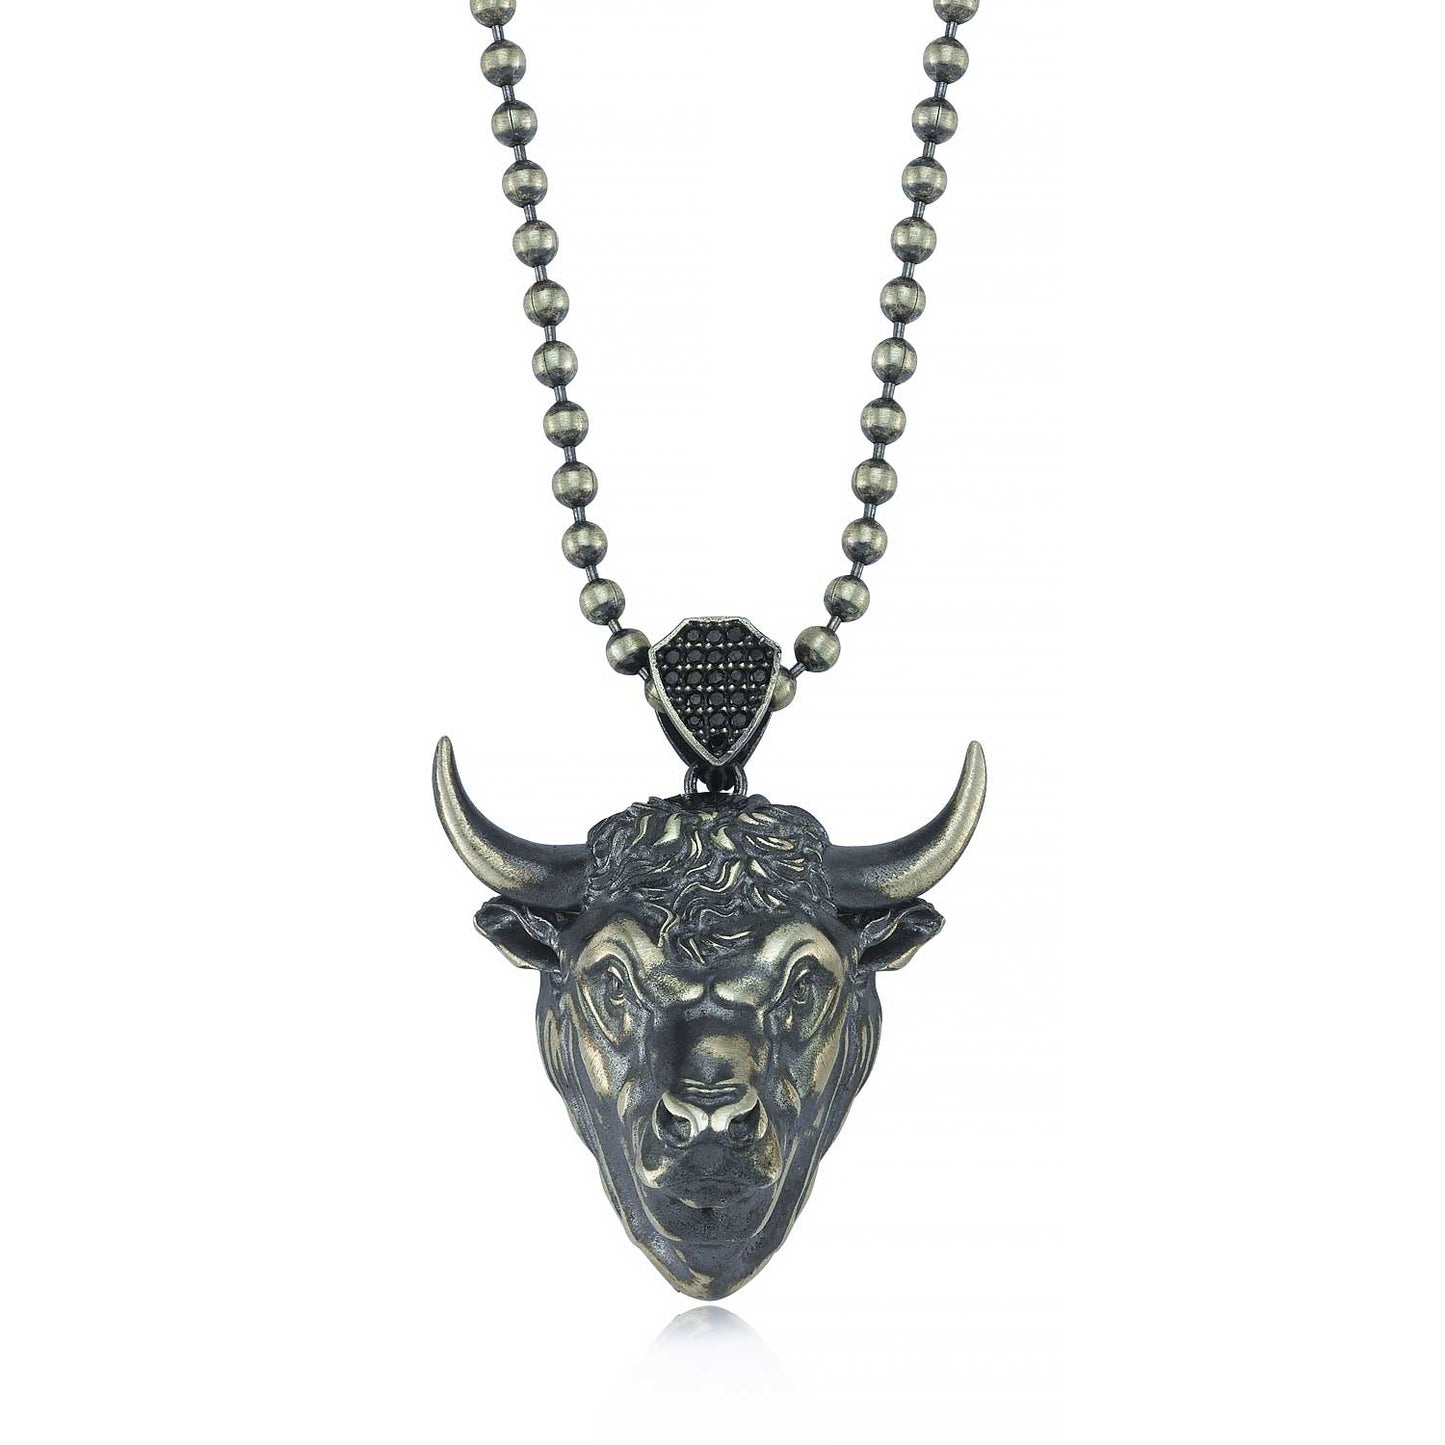 RARE PRINCE by CARAT SUTRA | Unique Designed Angry Bull Head Pendant for Taurus Zodiac for Men | 925 Sterling Silver Oxidized Pendant | Men's Jewelry | With Certificate of Authenticity and 925 Hallmark - caratsutra